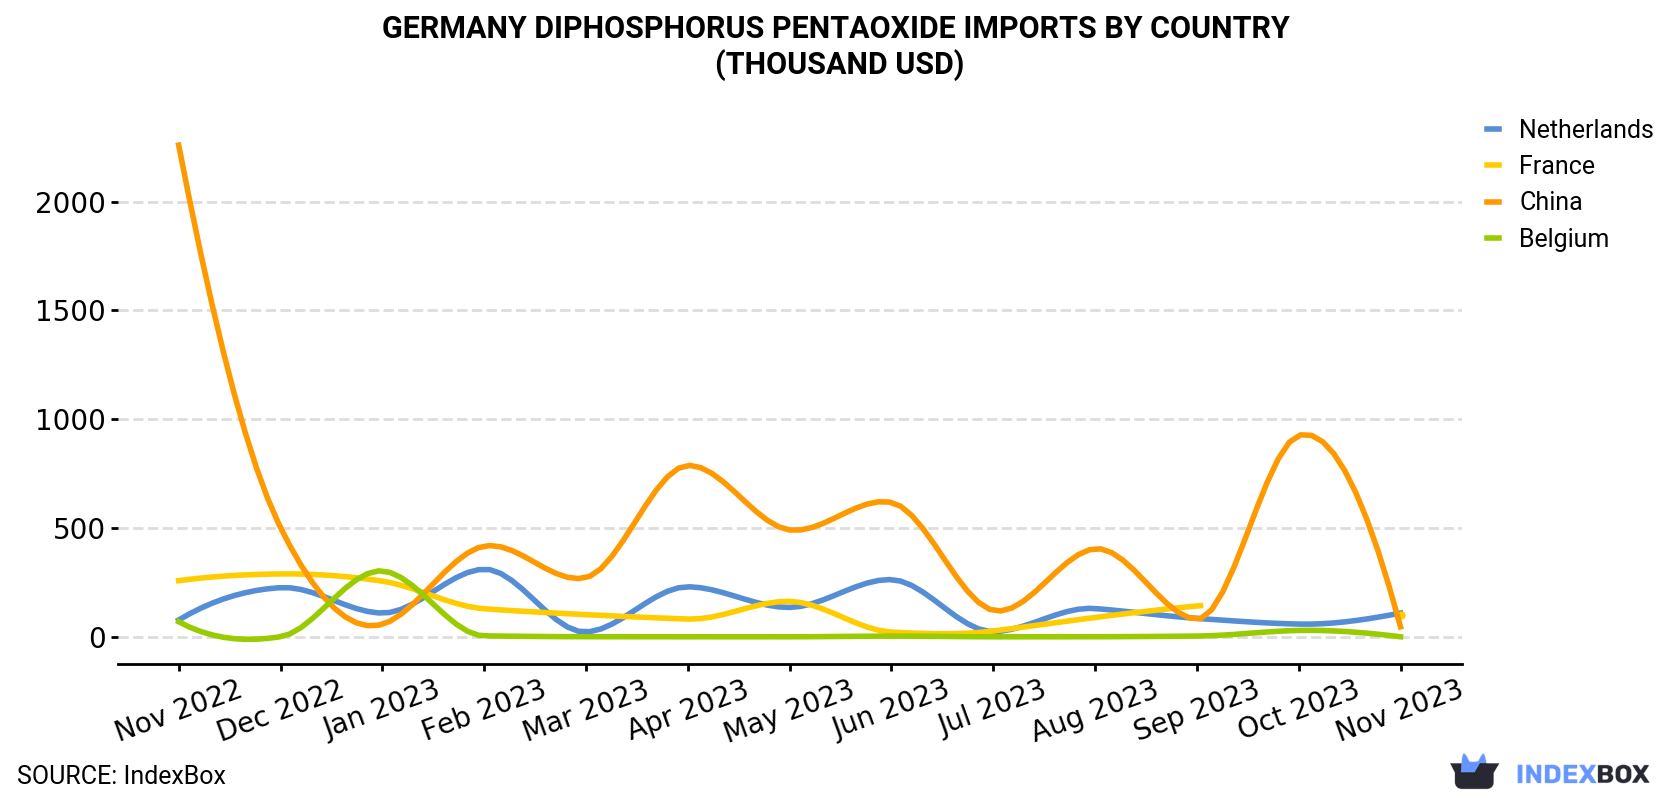 Germany Diphosphorus Pentaoxide Imports By Country (Thousand USD)